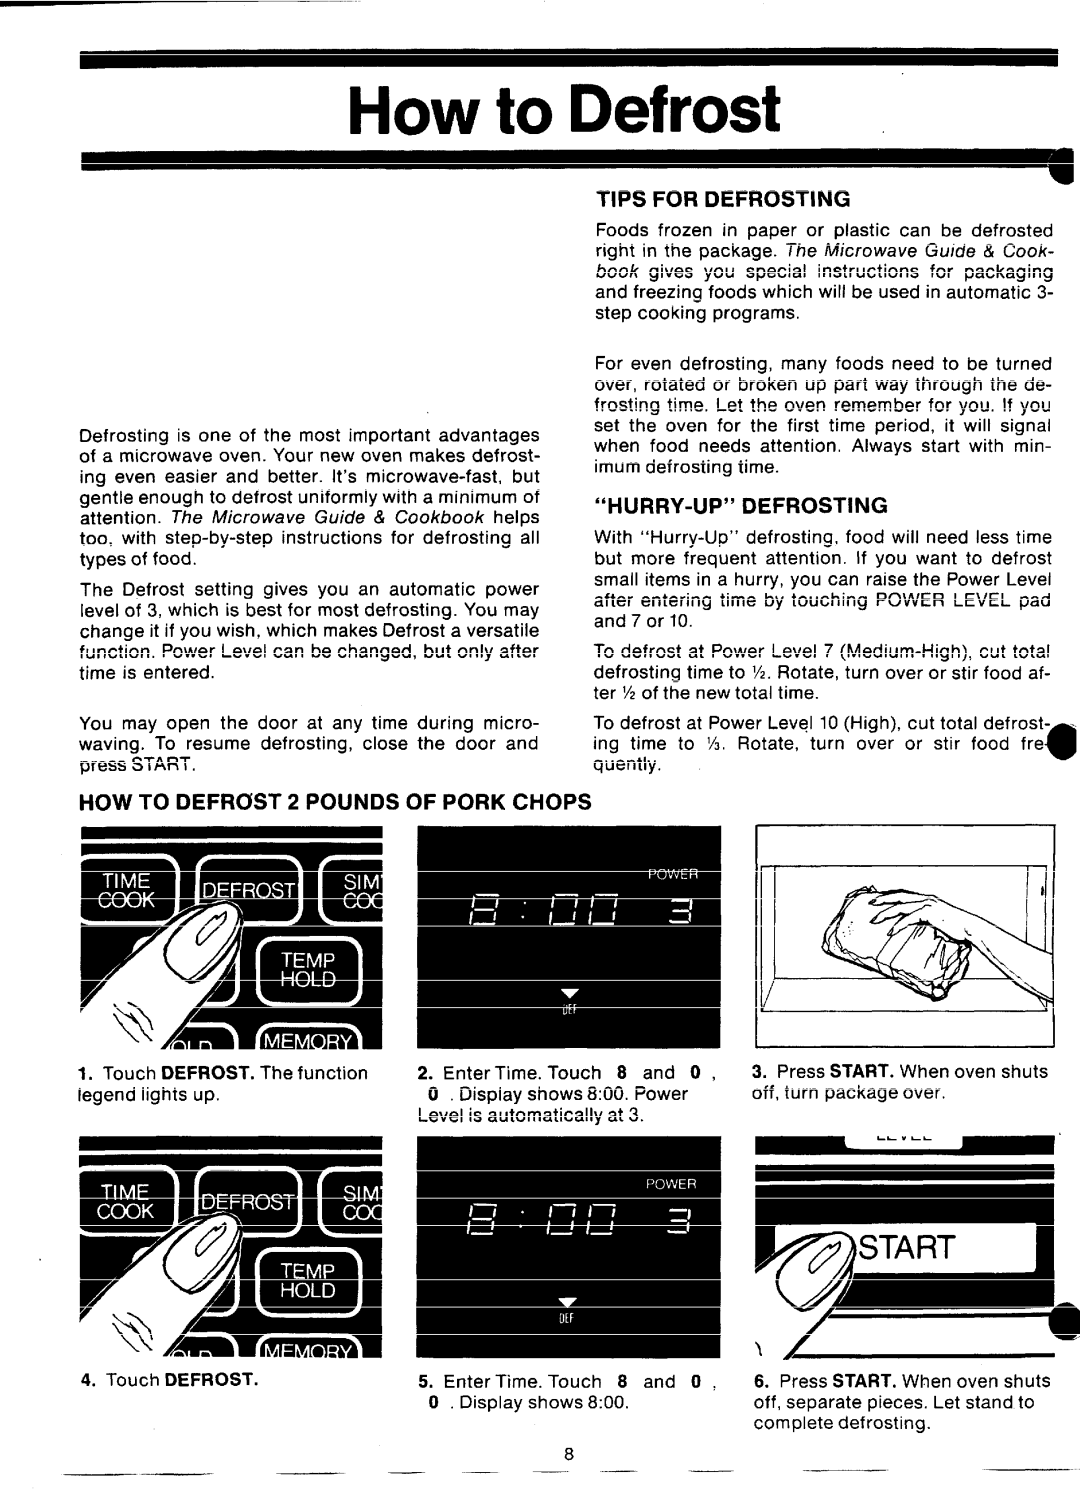 GE 49-4492, JVM57 manual How to Defrost .”, Tips For Defrosting, “Hurry-Up”Defrosting, HOW TO DEFROST 2 POUNDS OF PORK CHOPS 